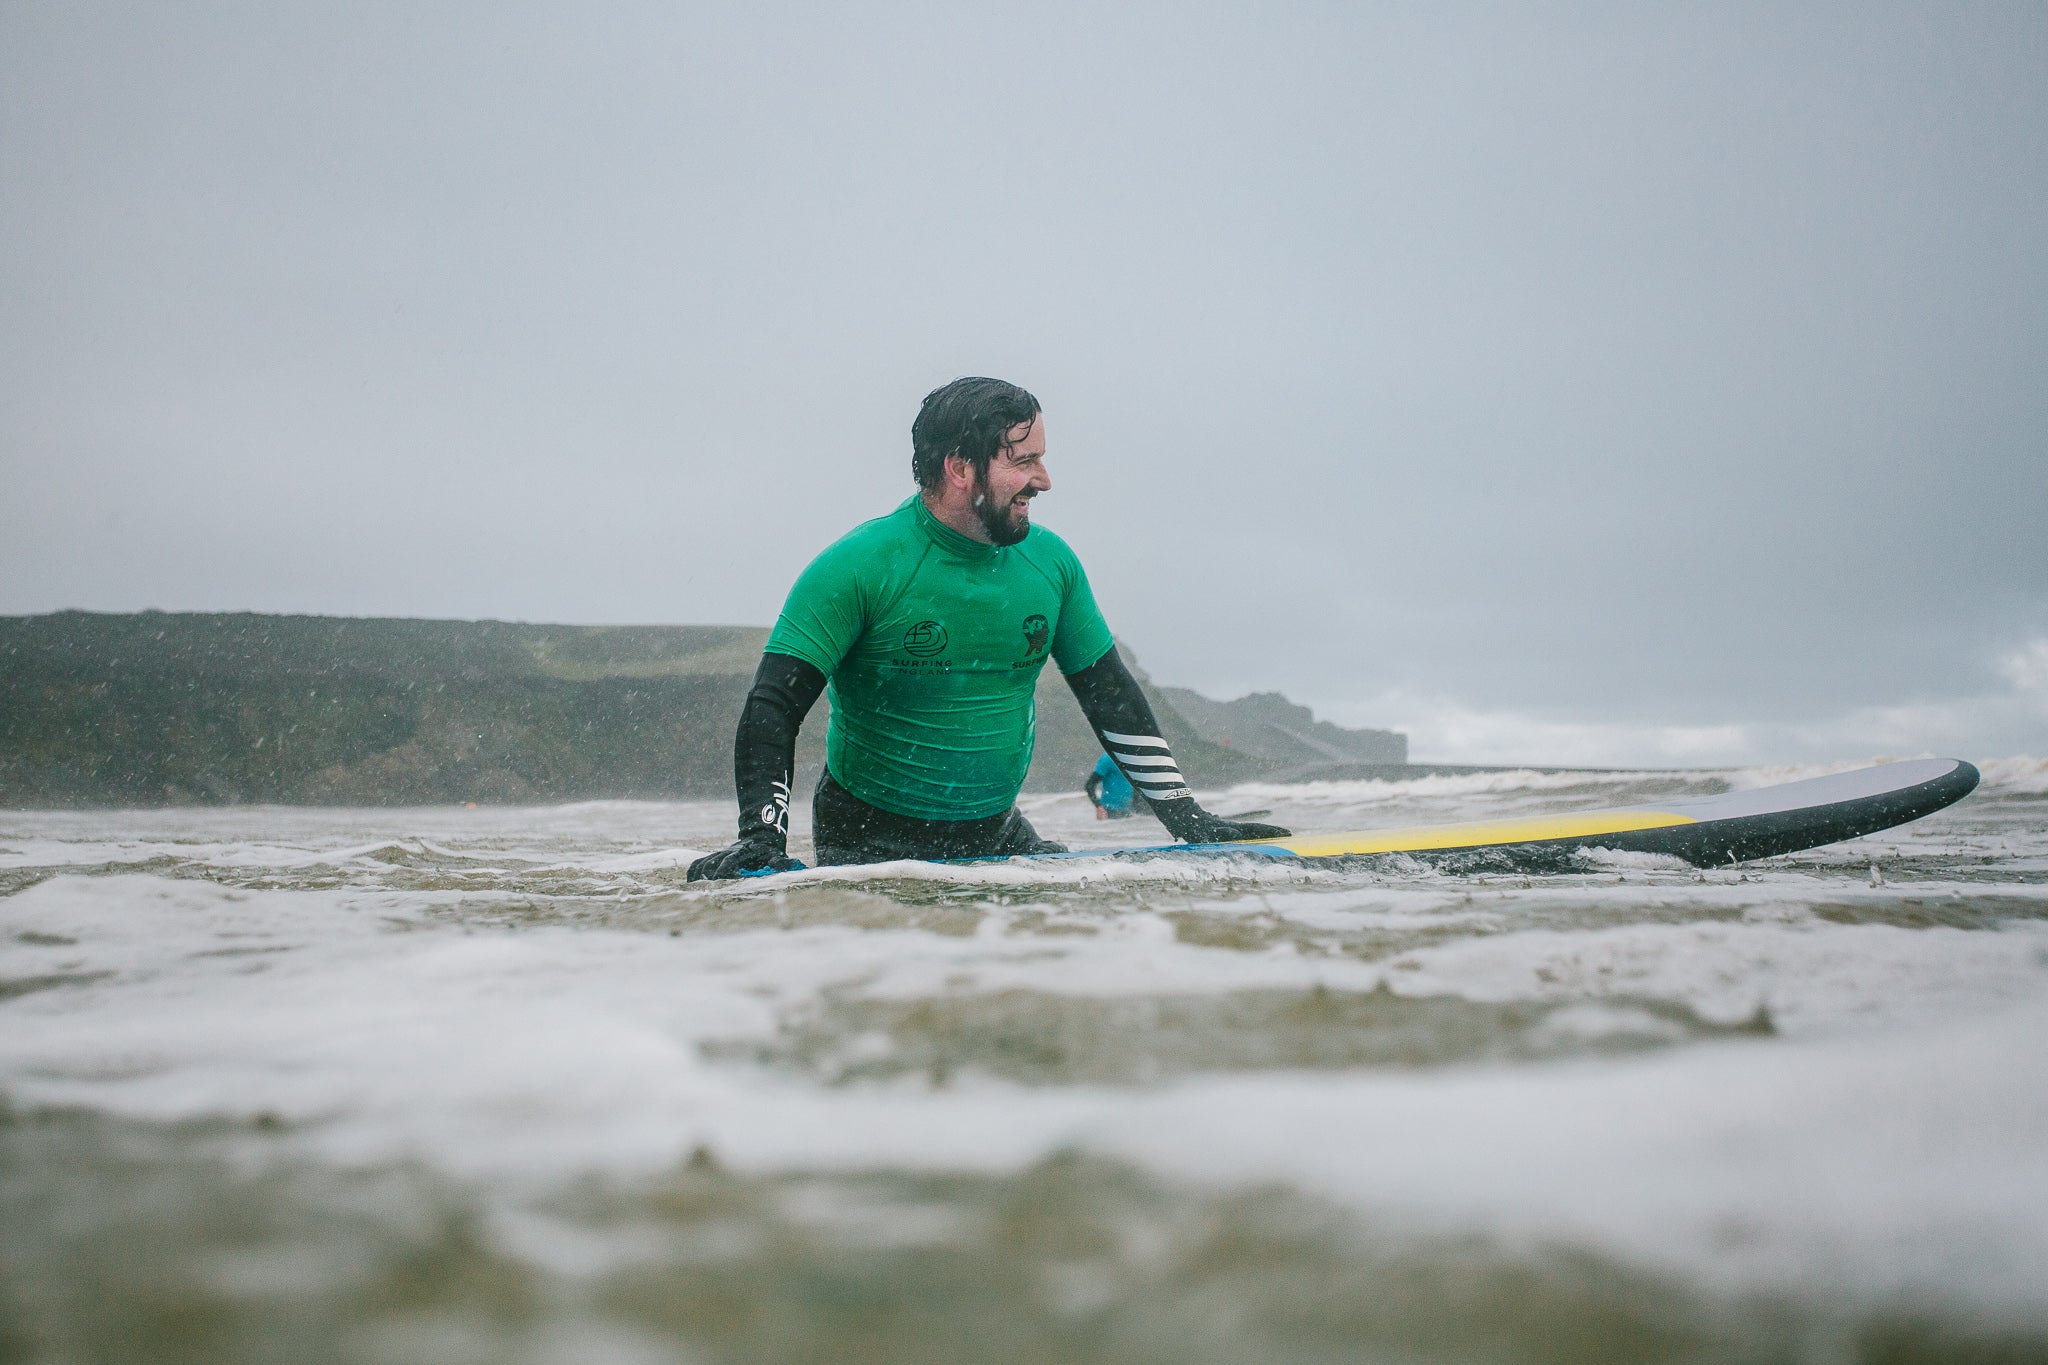 Surf instructor in the water holding a surfboard